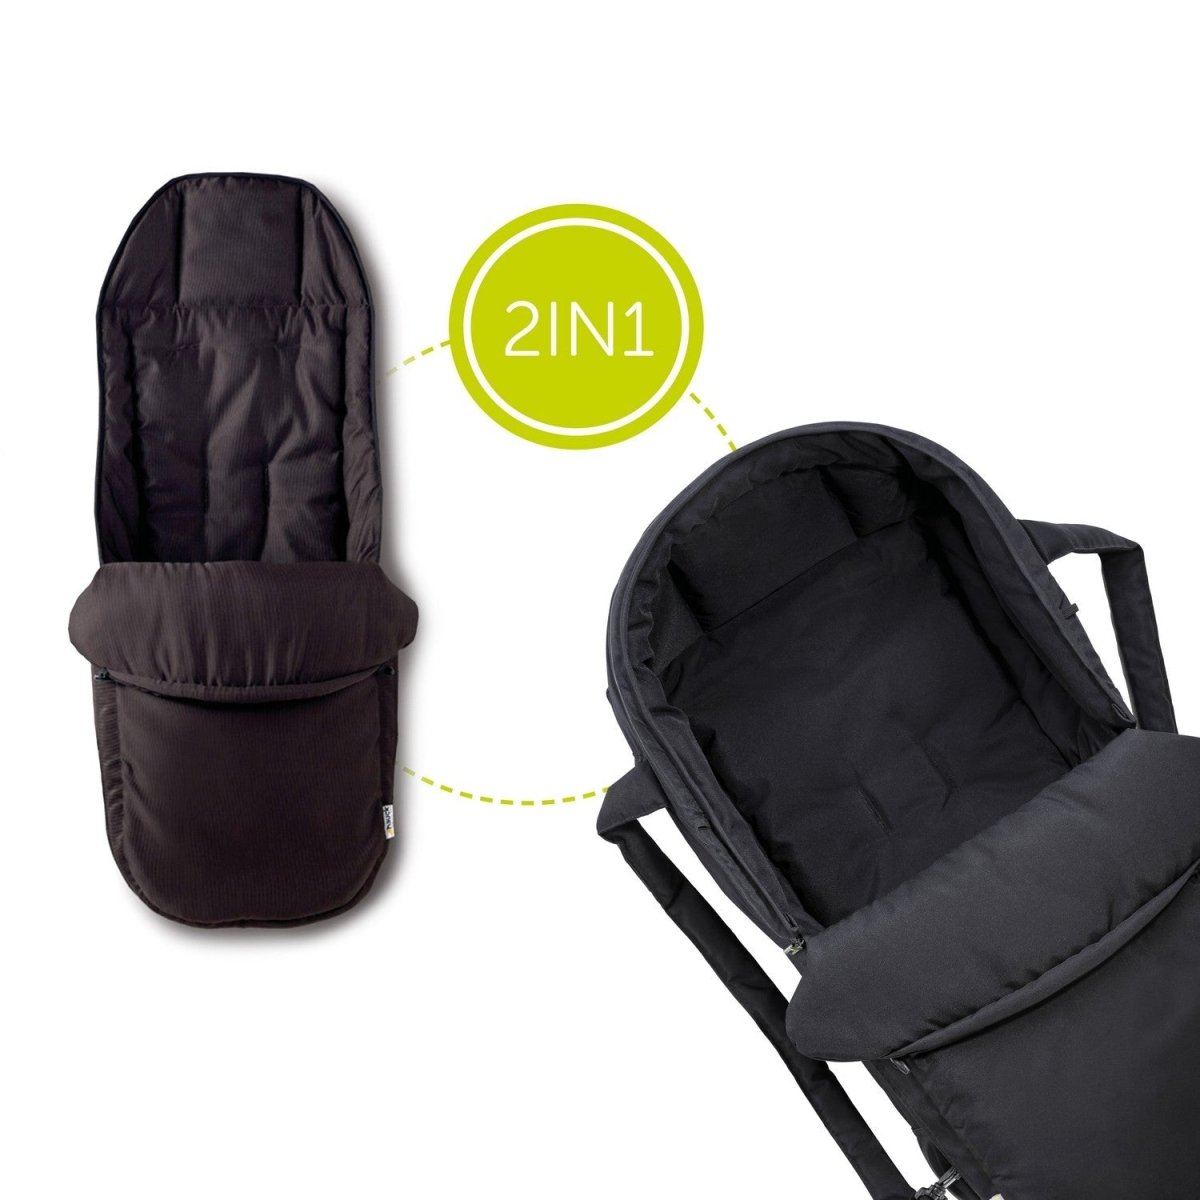 Hauck 2 In1 Carrycot Travel & Gear - 530023